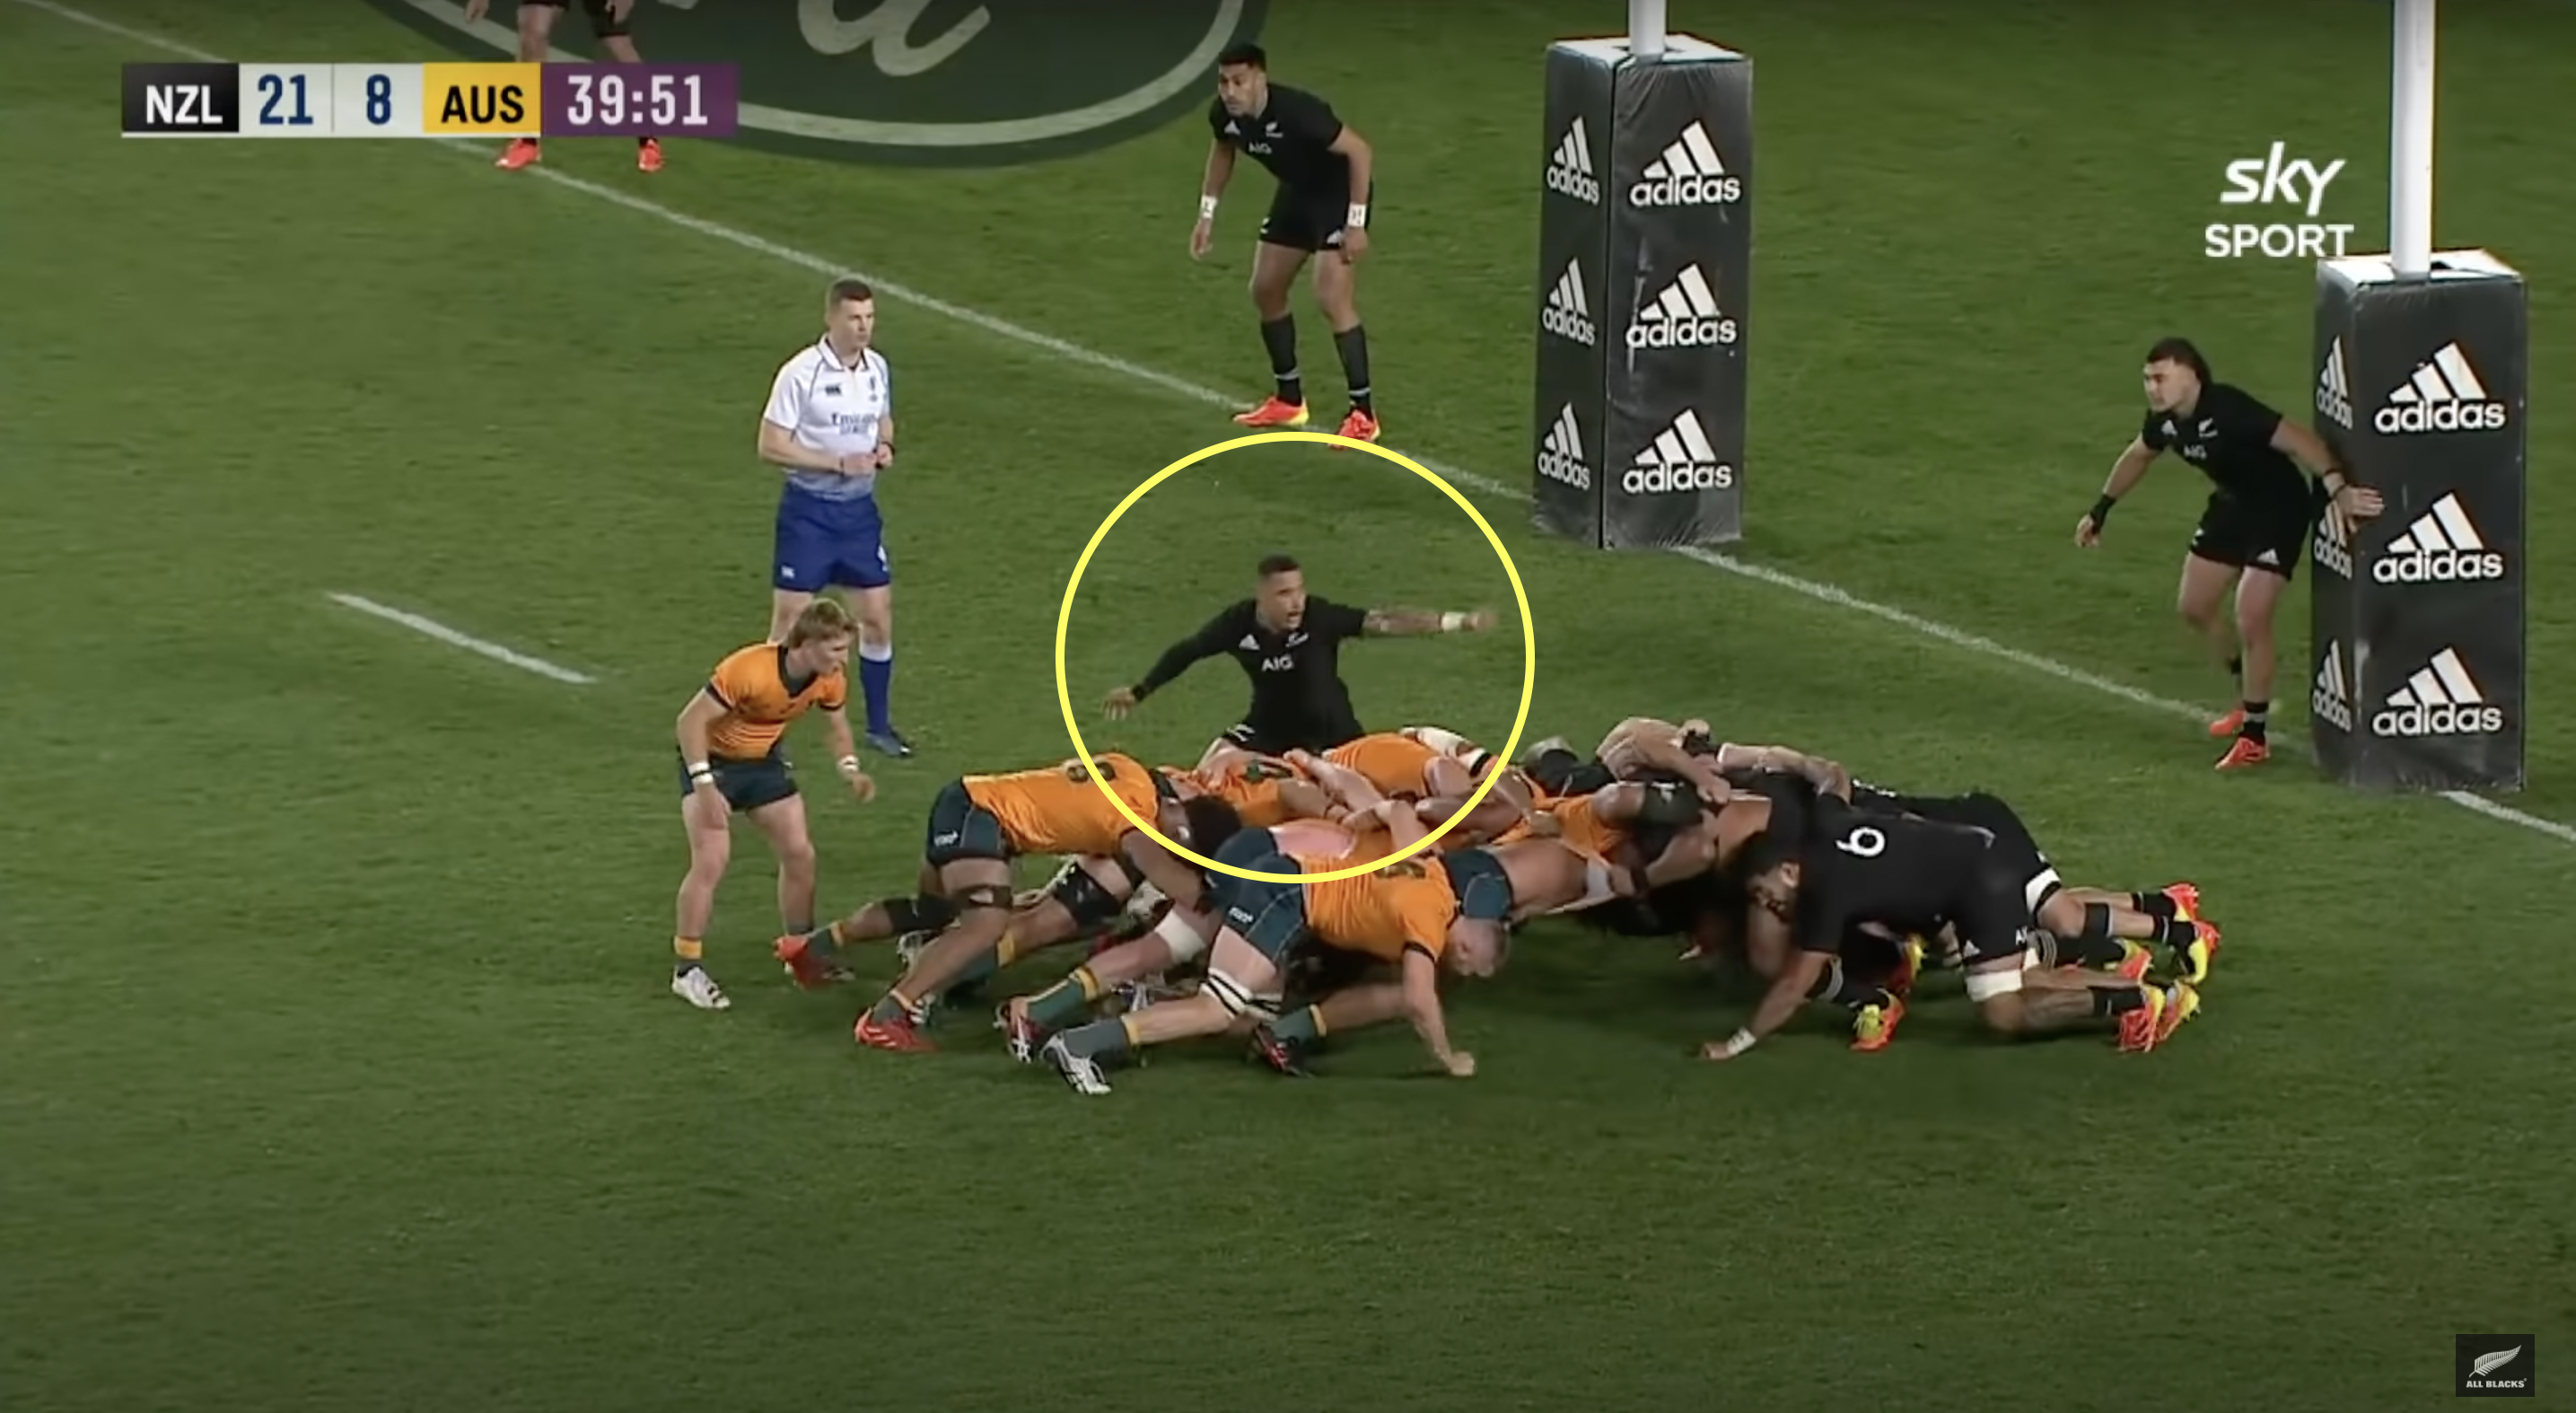 Proof Aaron Smith is an evil genius for the All Blacks